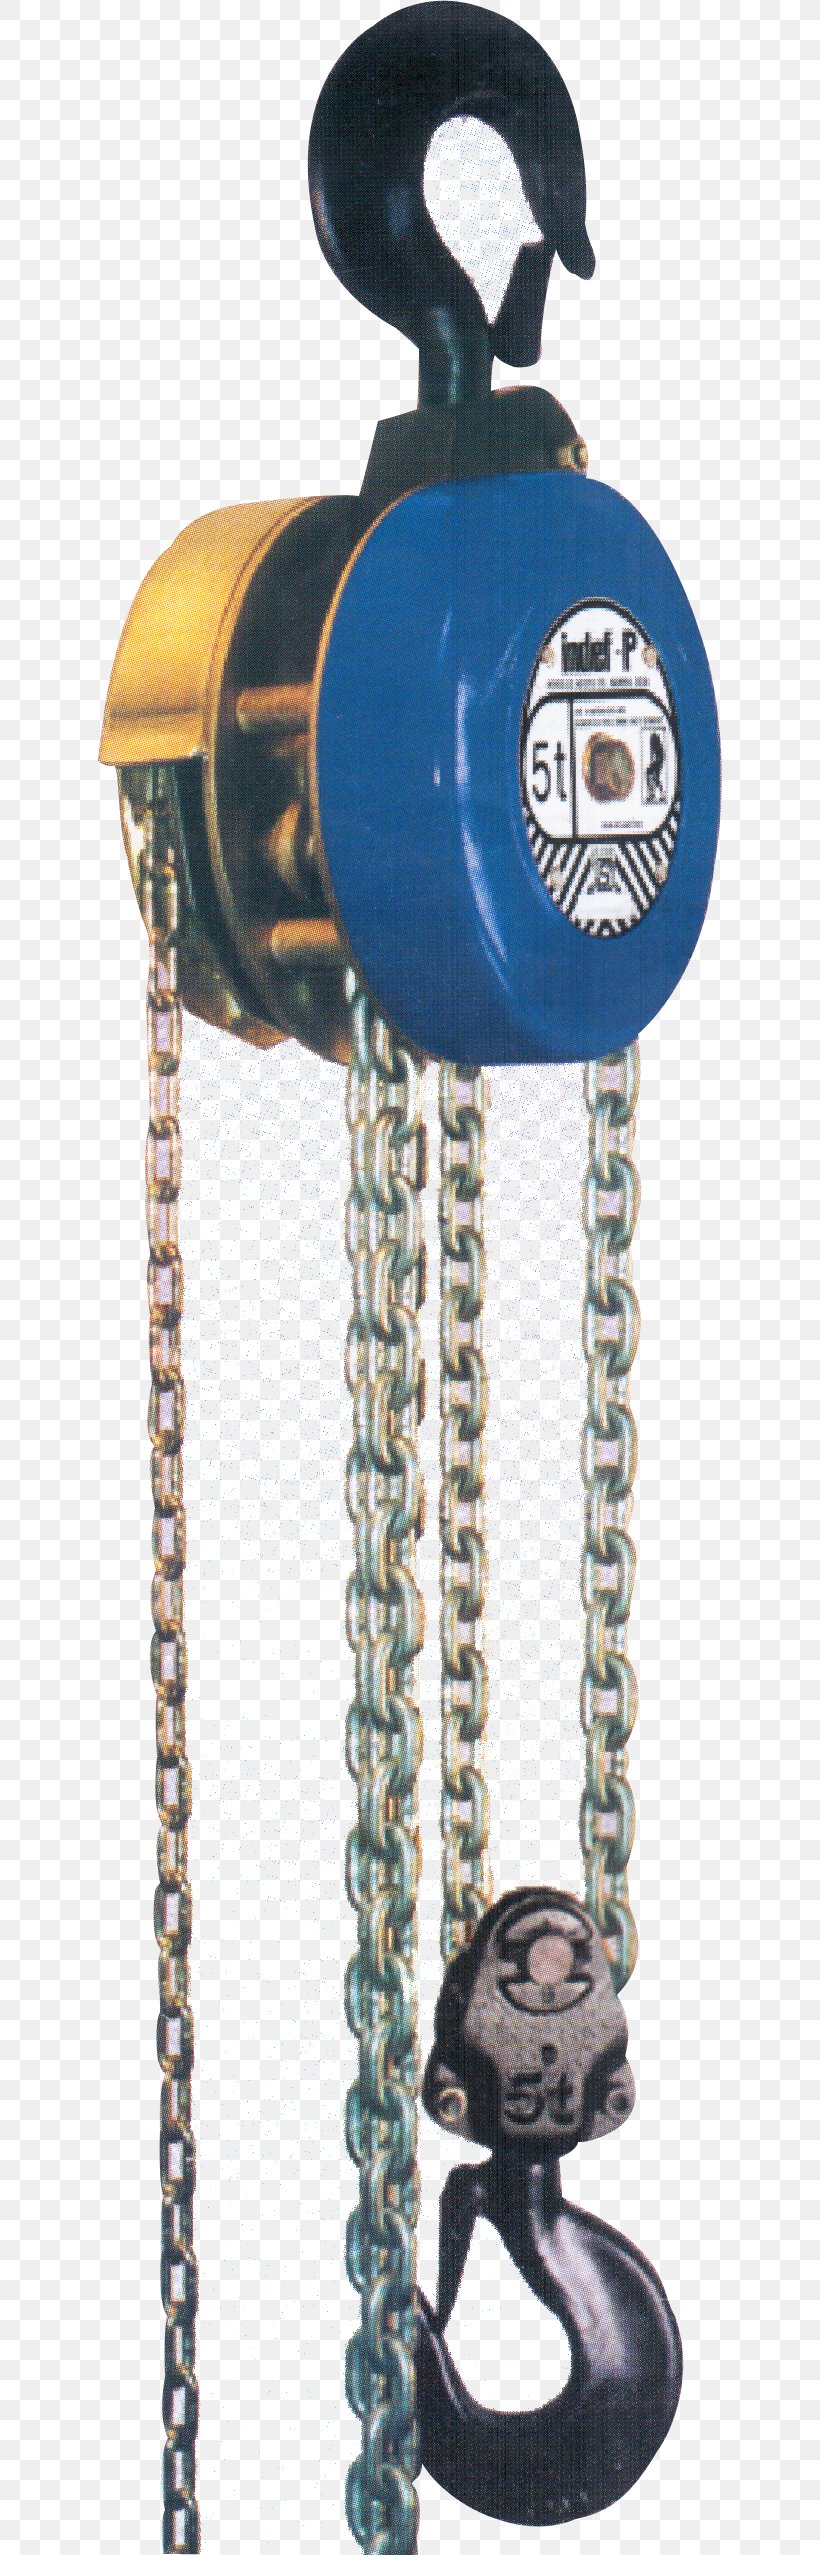 India Hoist Pulley Block And Tackle, PNG, 624x2555px, India, Block, Block And Tackle, Chain, Company Download Free